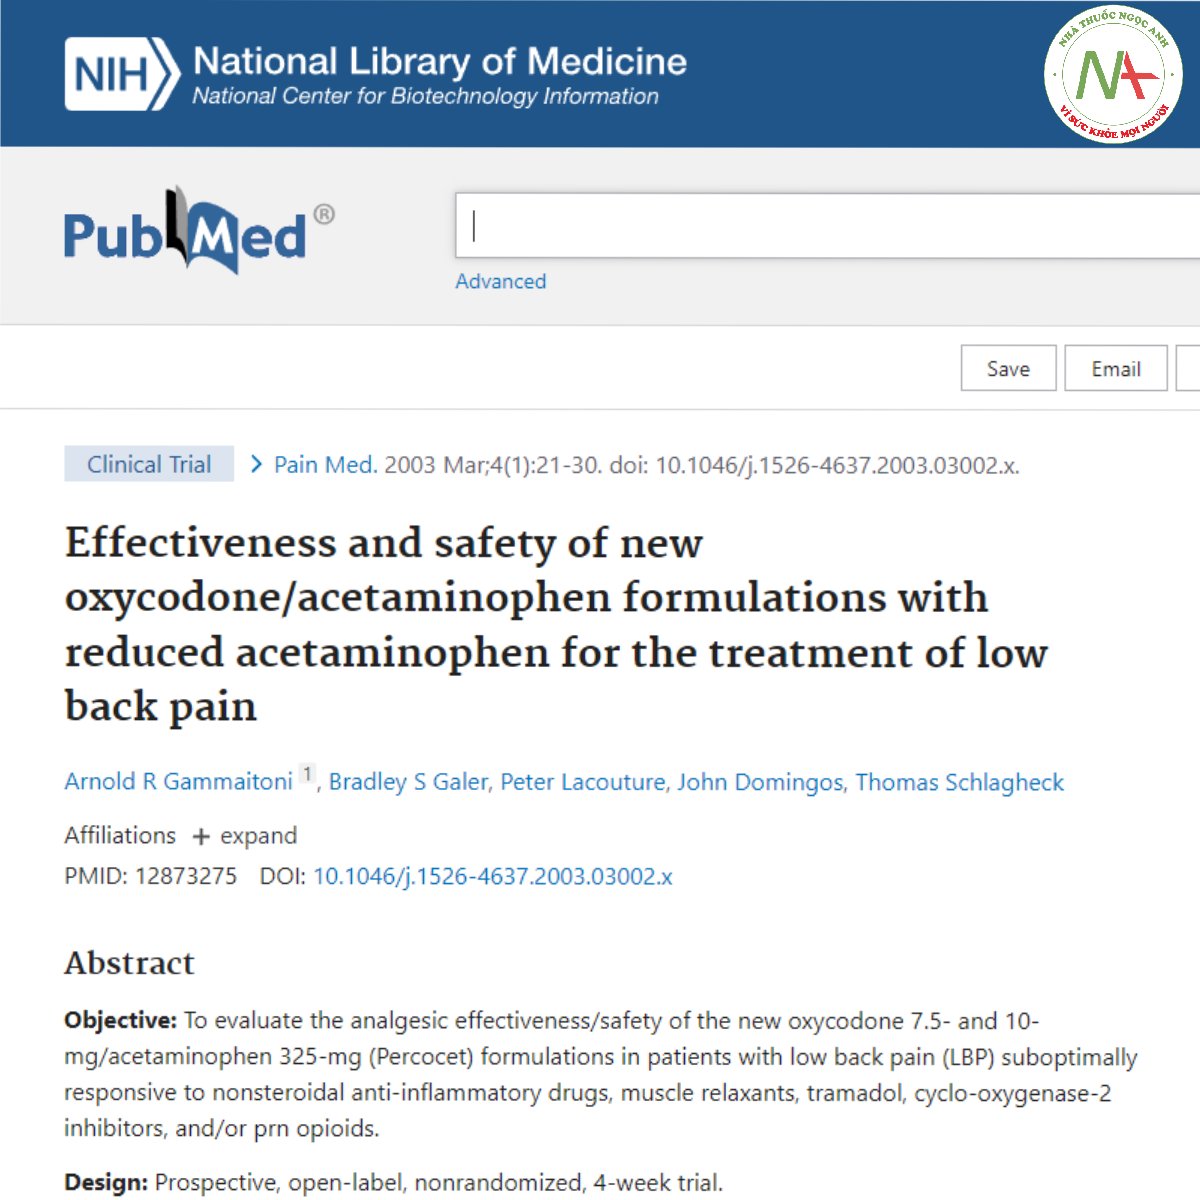 Effectiveness and safety of new oxycodone_acetaminophen formulations with reduced acetaminophen for the treatment of low back pain